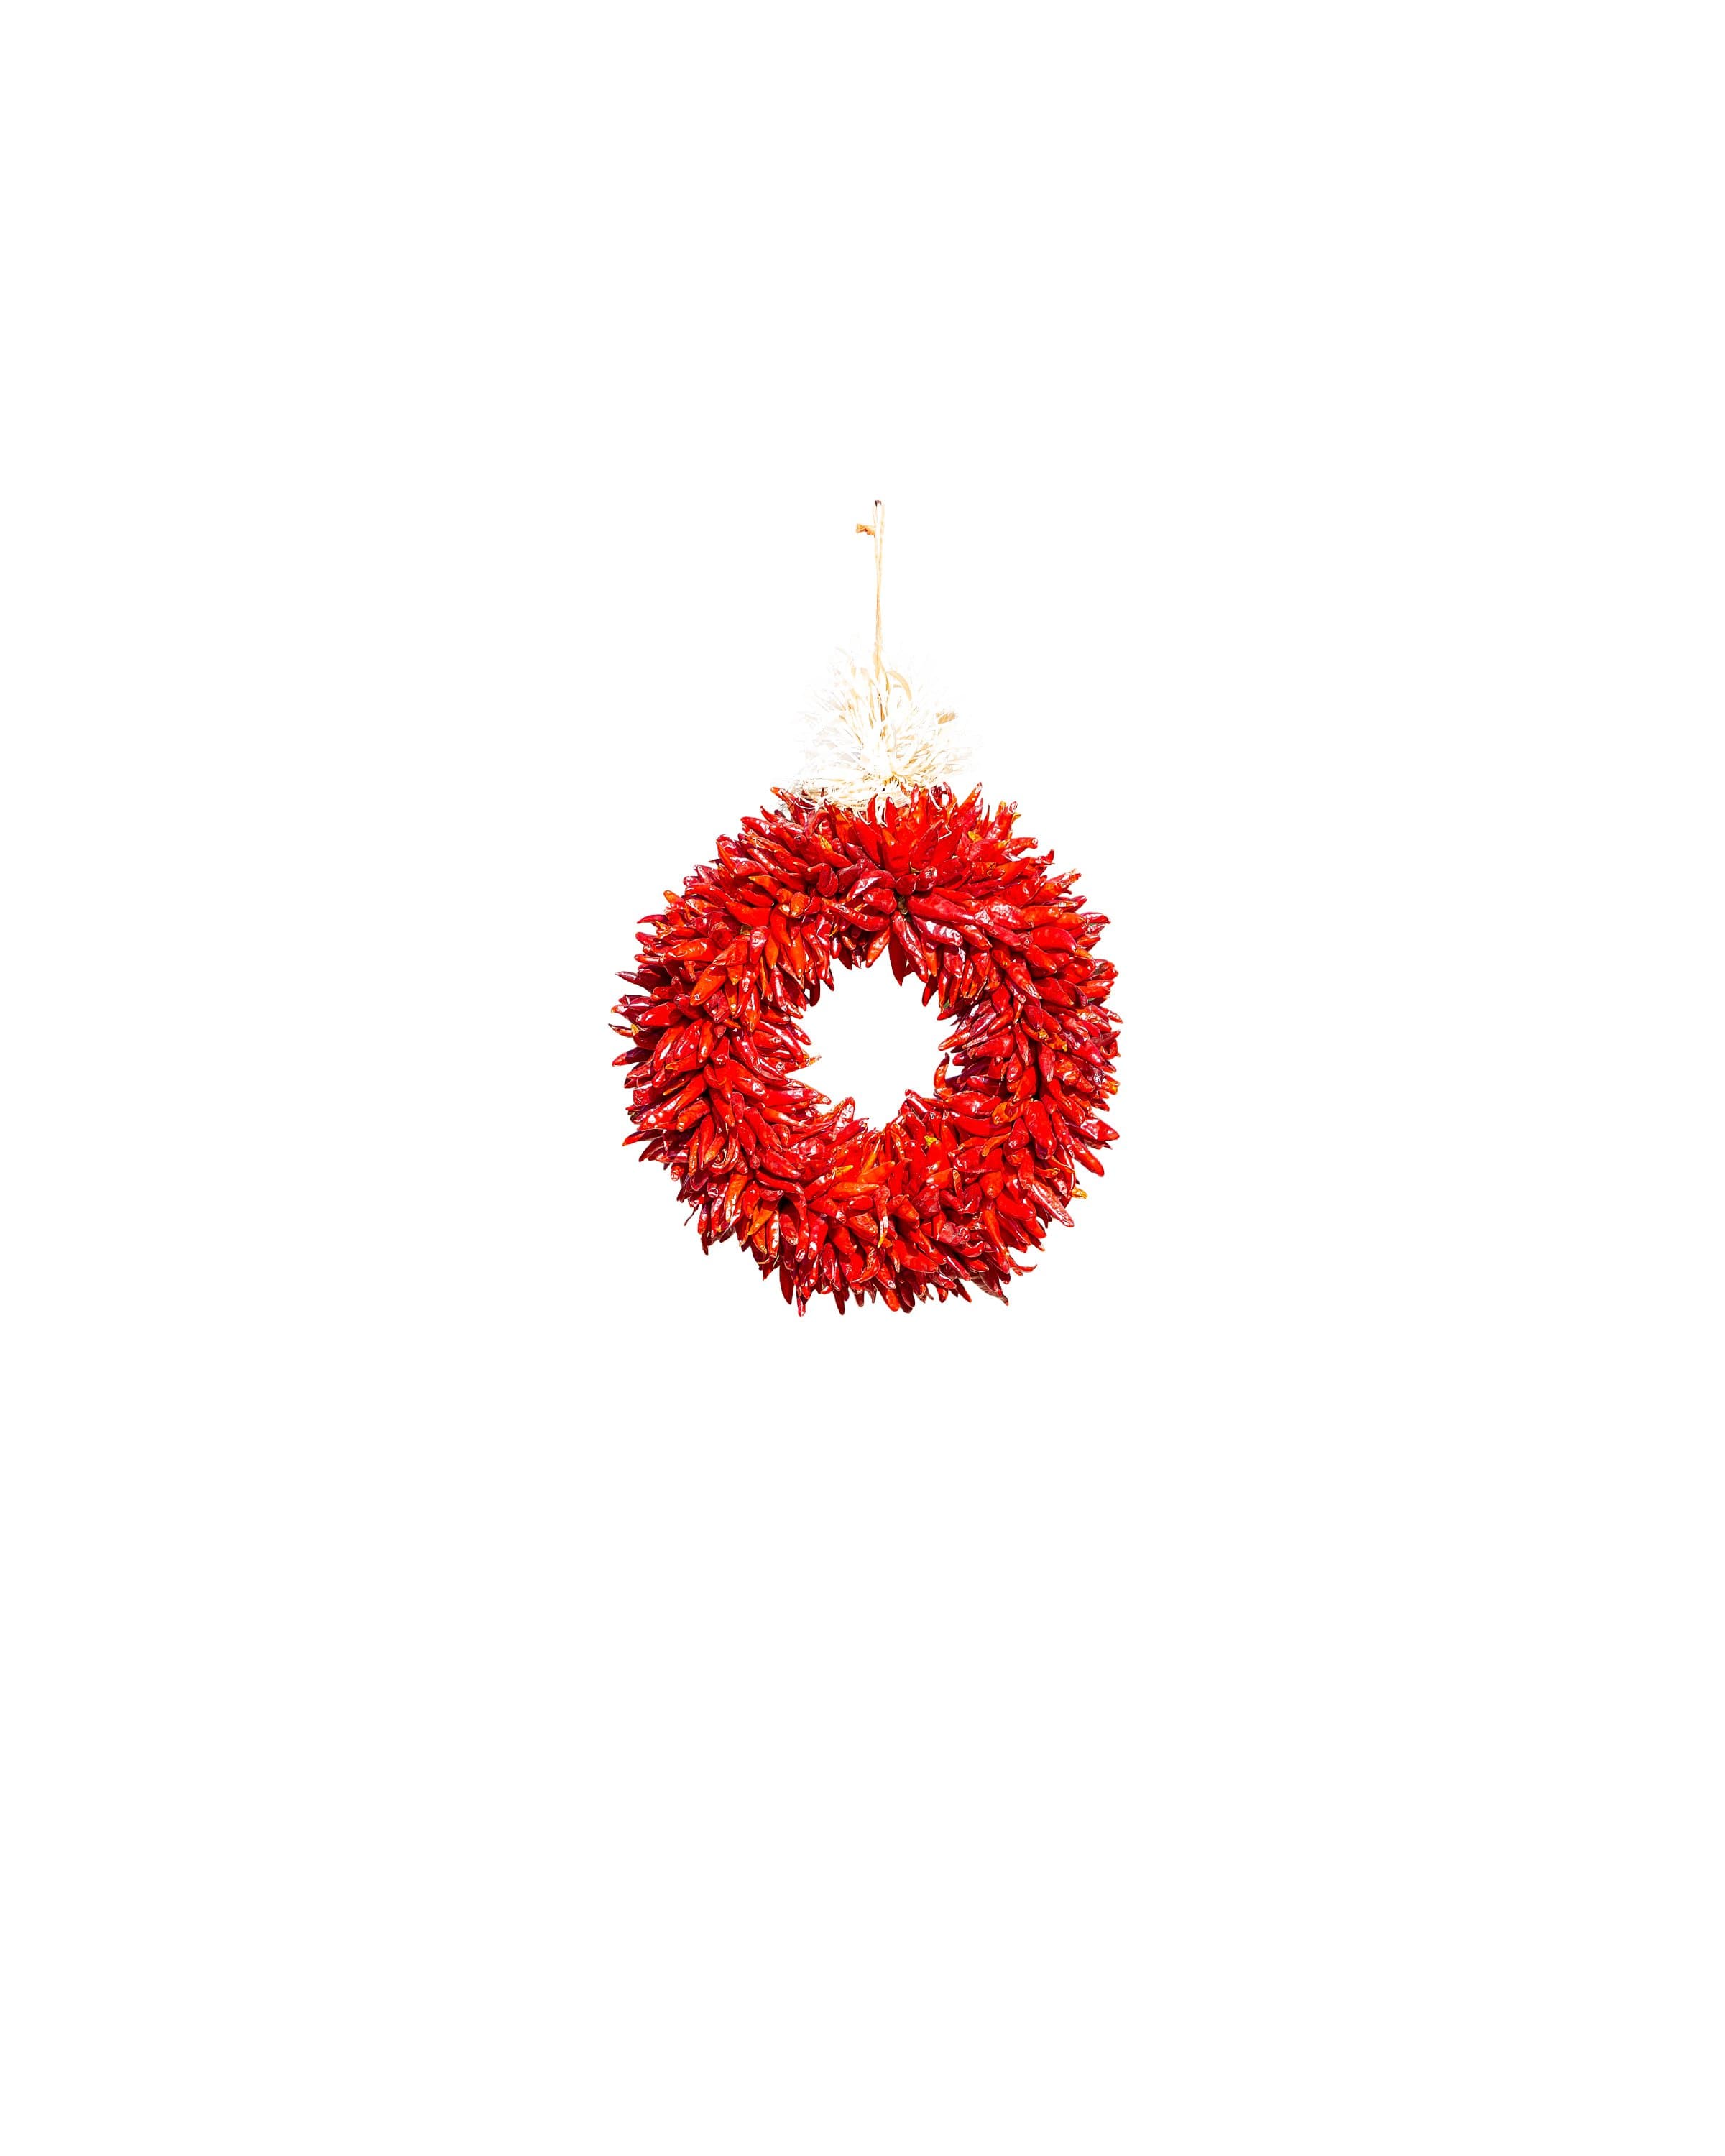 A vibrant red Chile Pequin Wreaths hanging against a plain white background.